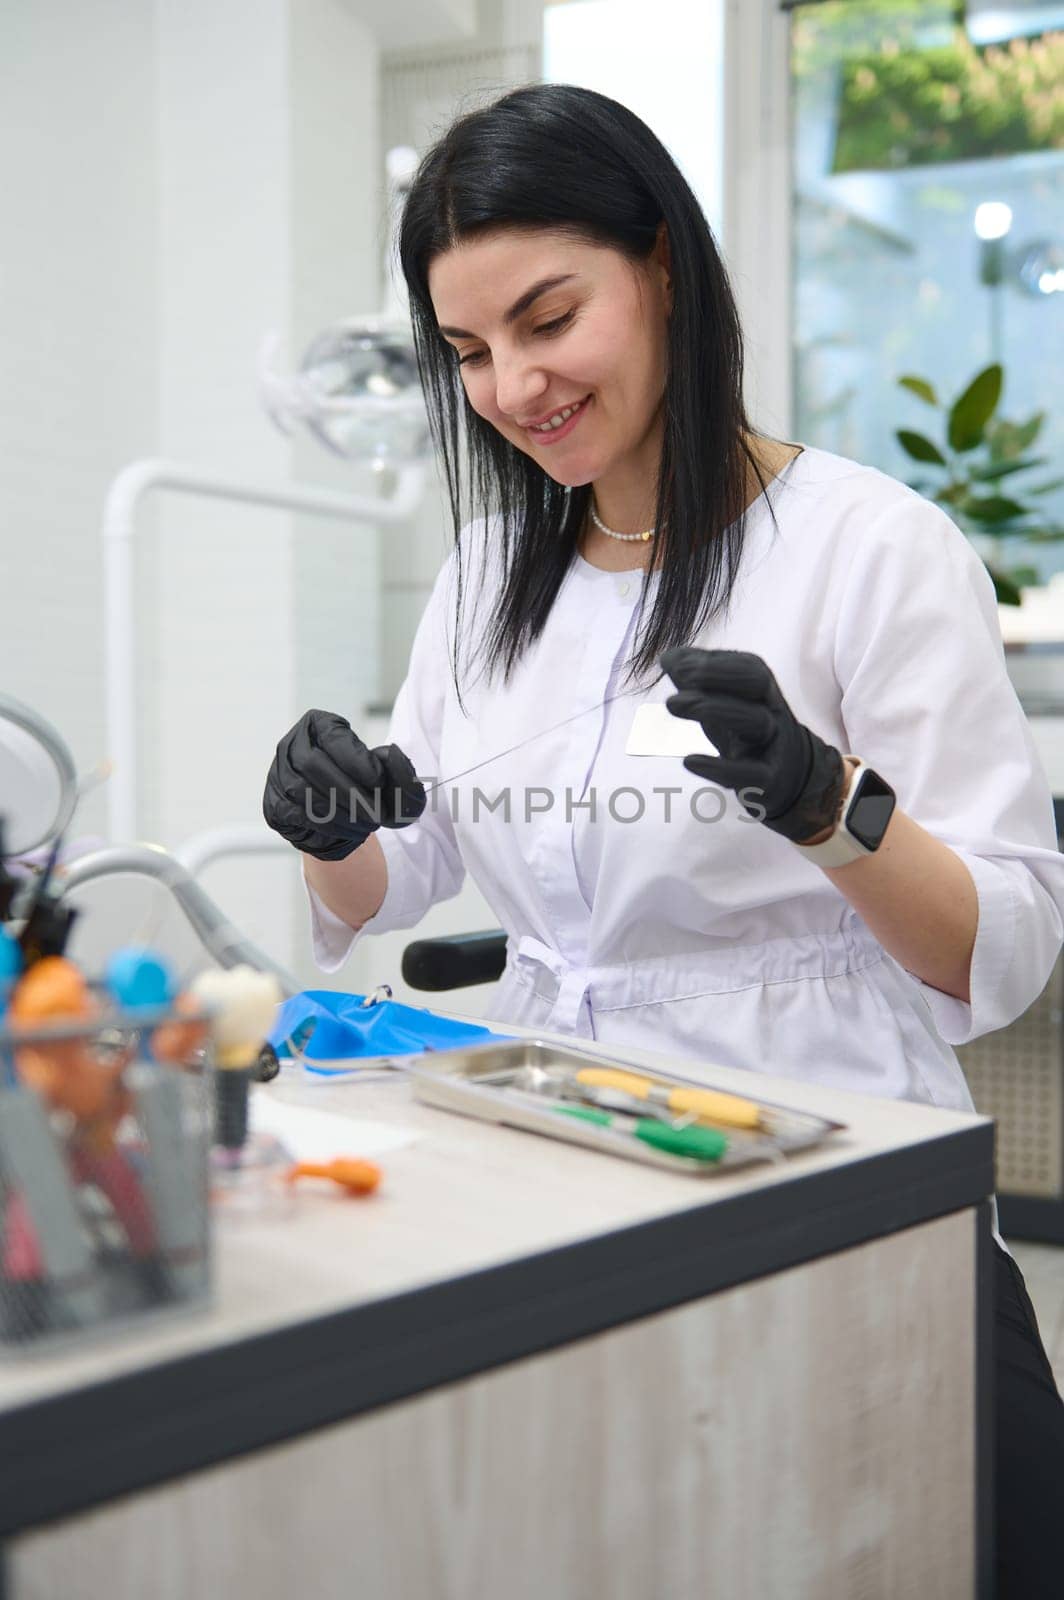 Portrait of Caucasian confident smiling woman dentist doctor working in dental office, dressed in white medical uniform and black sterile gloves. People. Profession. Healthcare worker. Medical staff